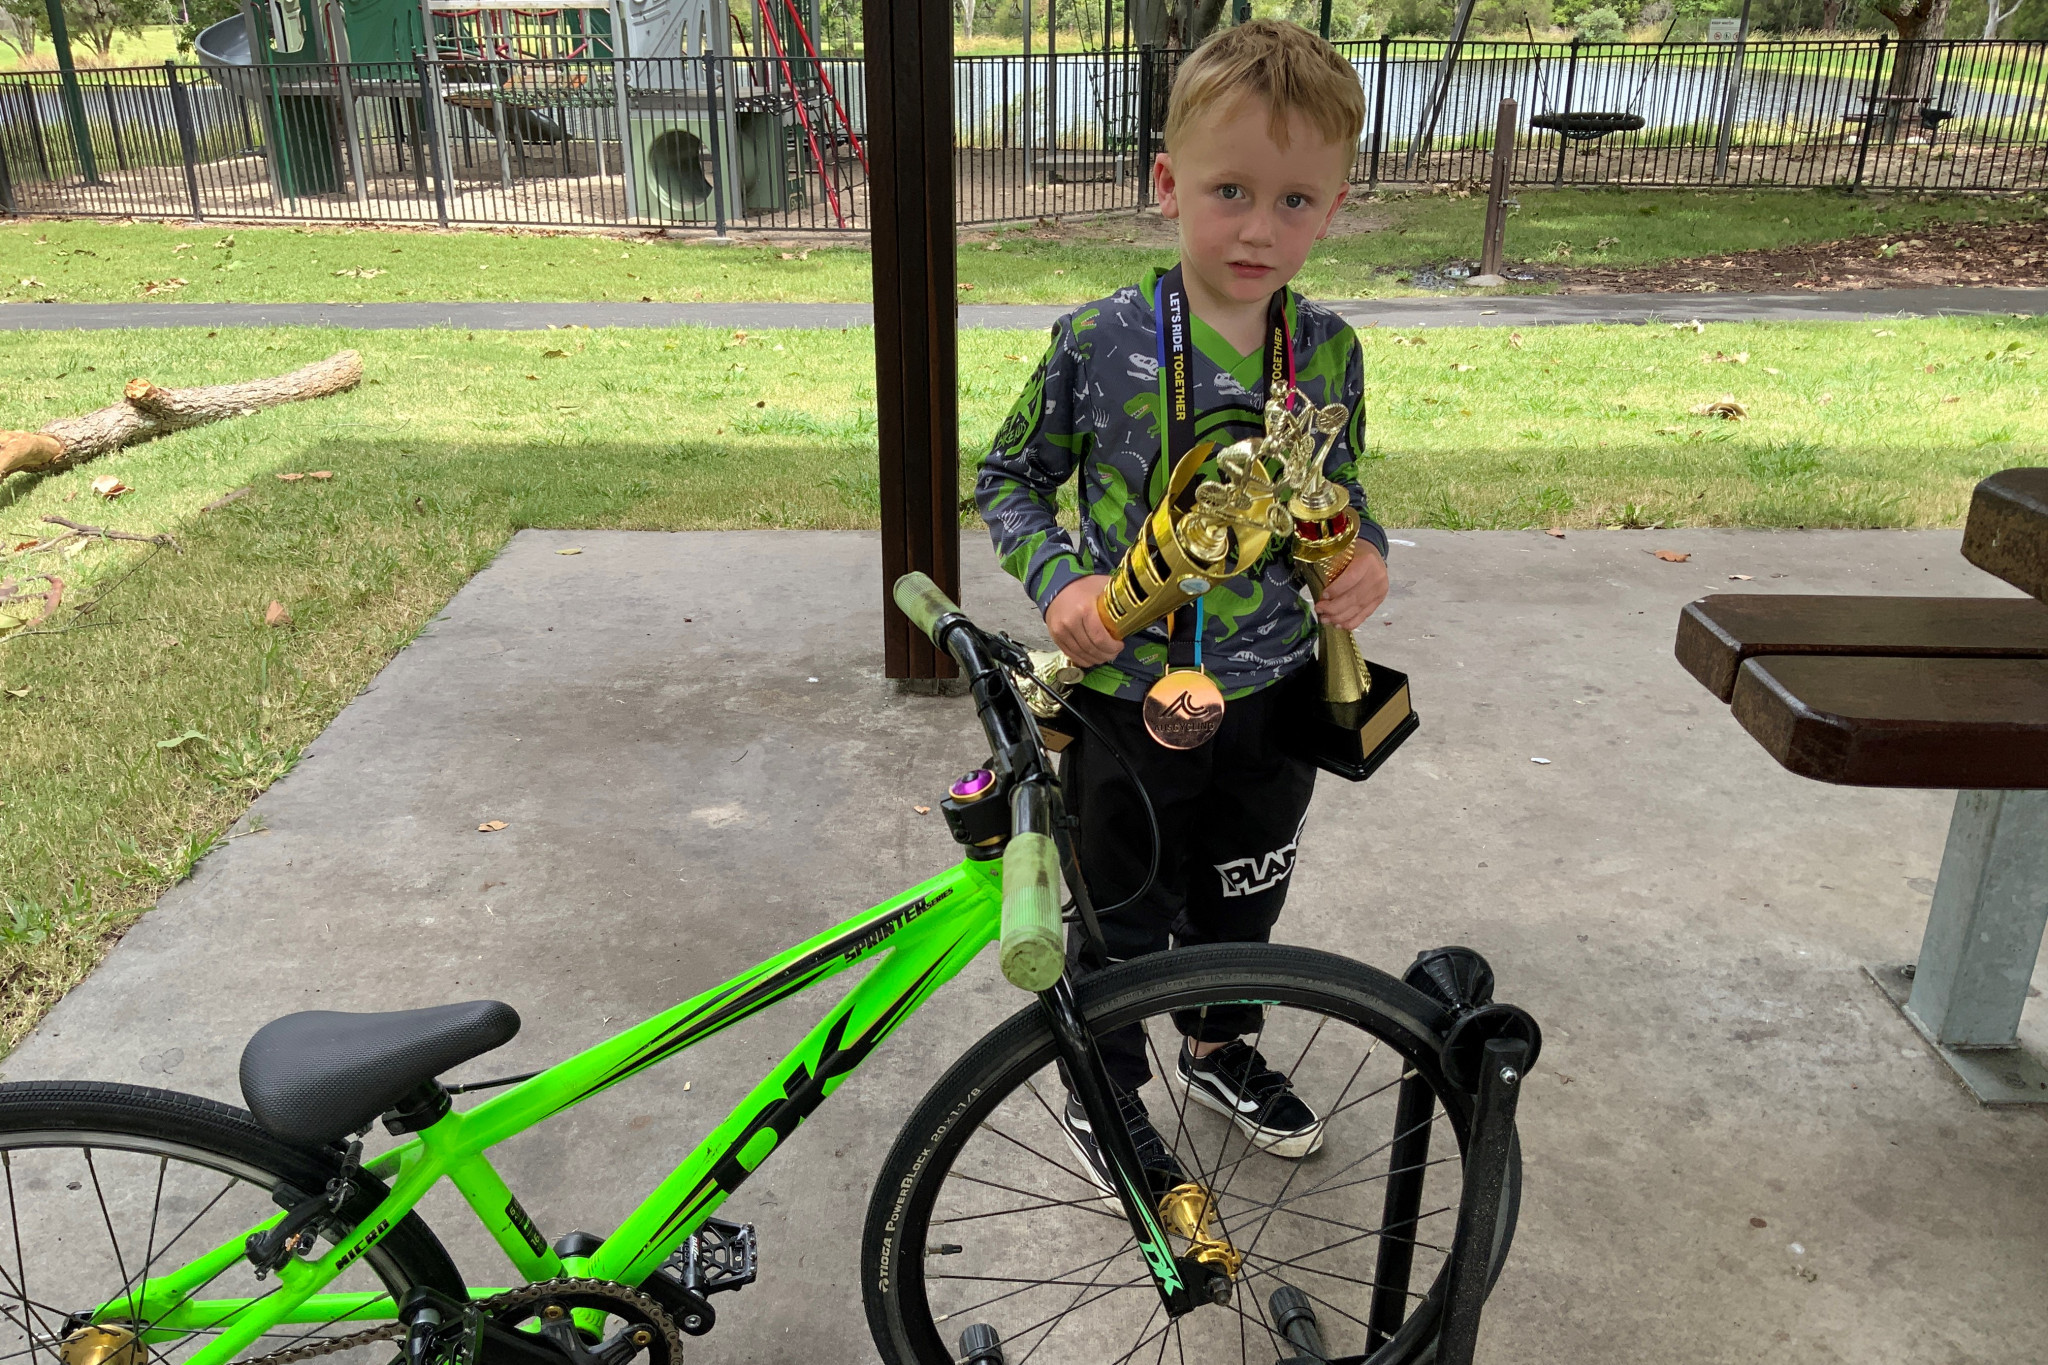 Four-year-old Jai Macdonald has already won some trophies in his chosen sport of BMX riding, and he is now preparing to compete in Adelaide.